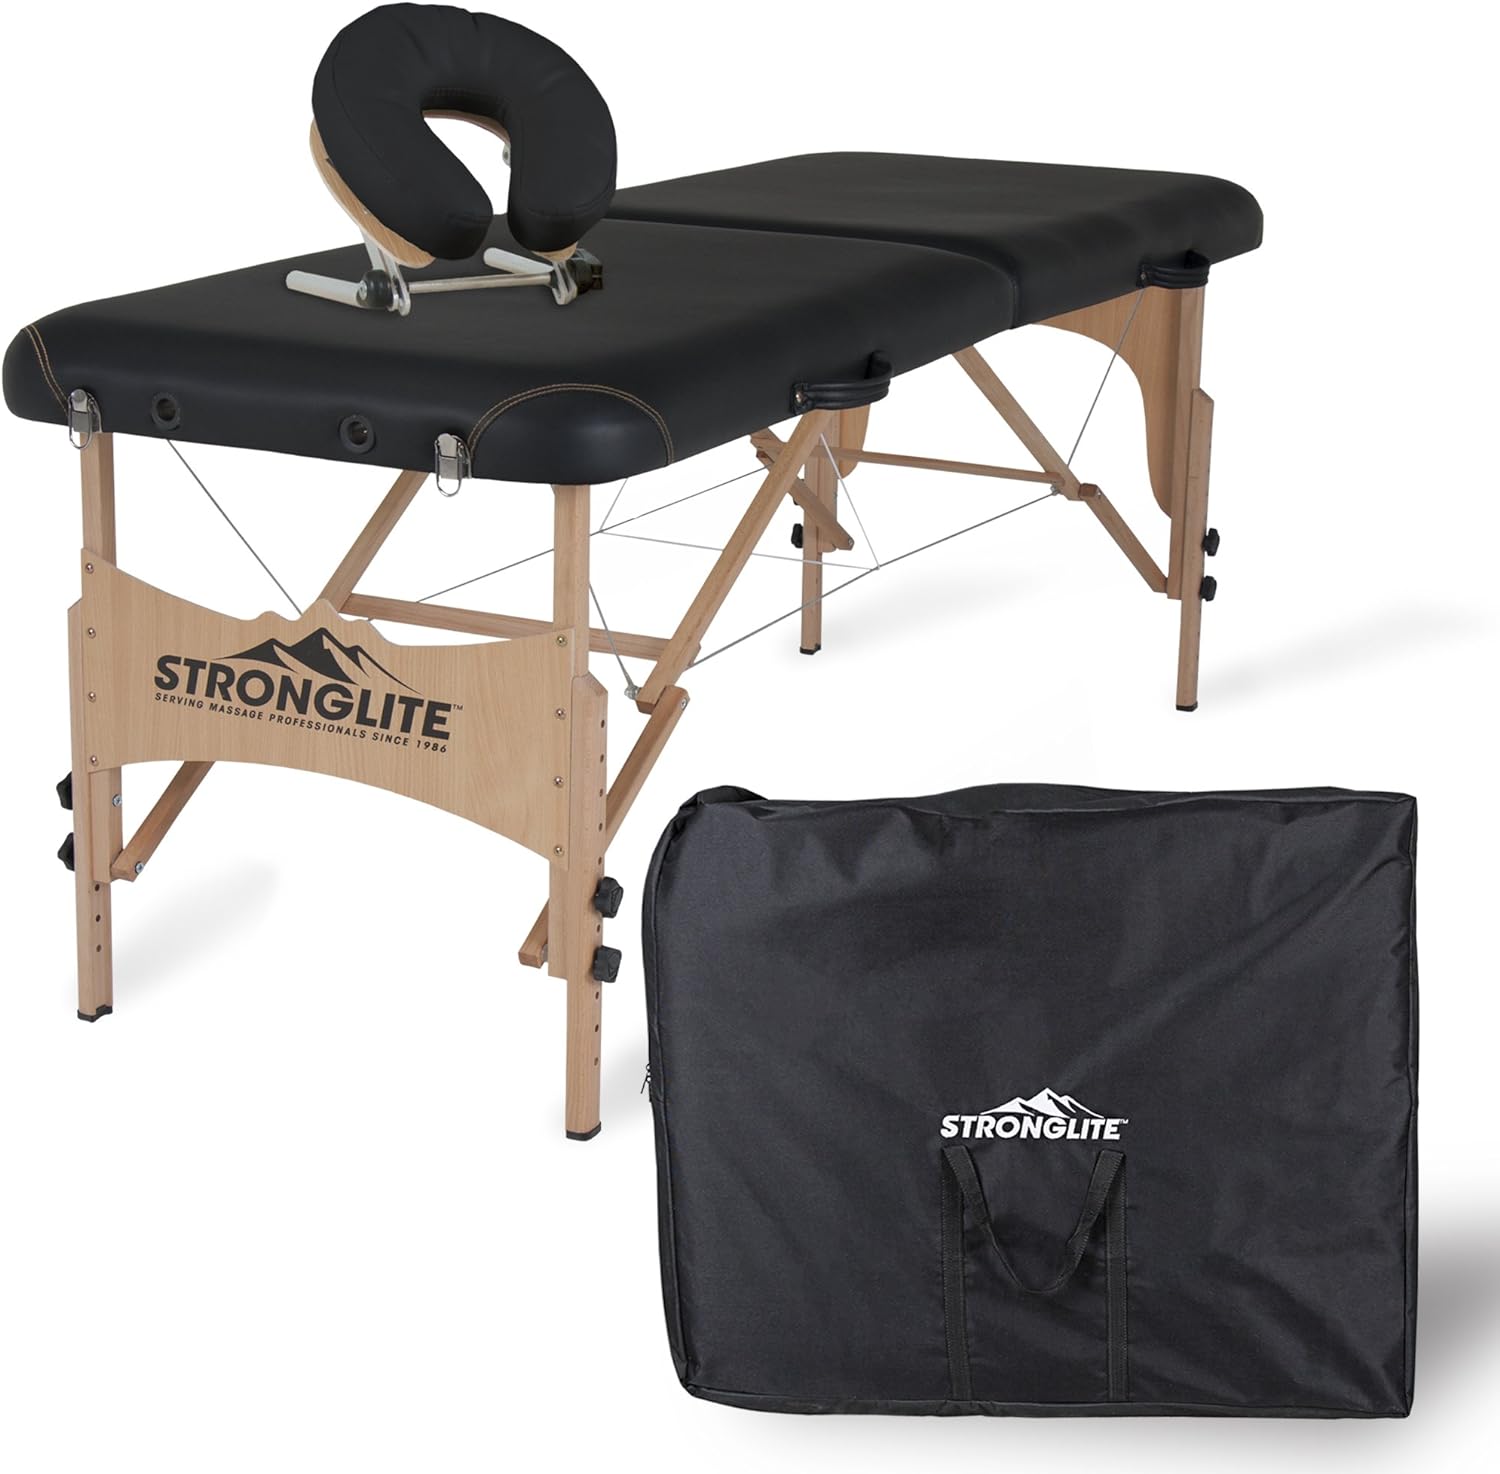 STRONGLITE Portable Massage Table Package Shasta - All-In-One Treatment Table w/ Adjustable Face Cradle, Pillow & Carrying Case